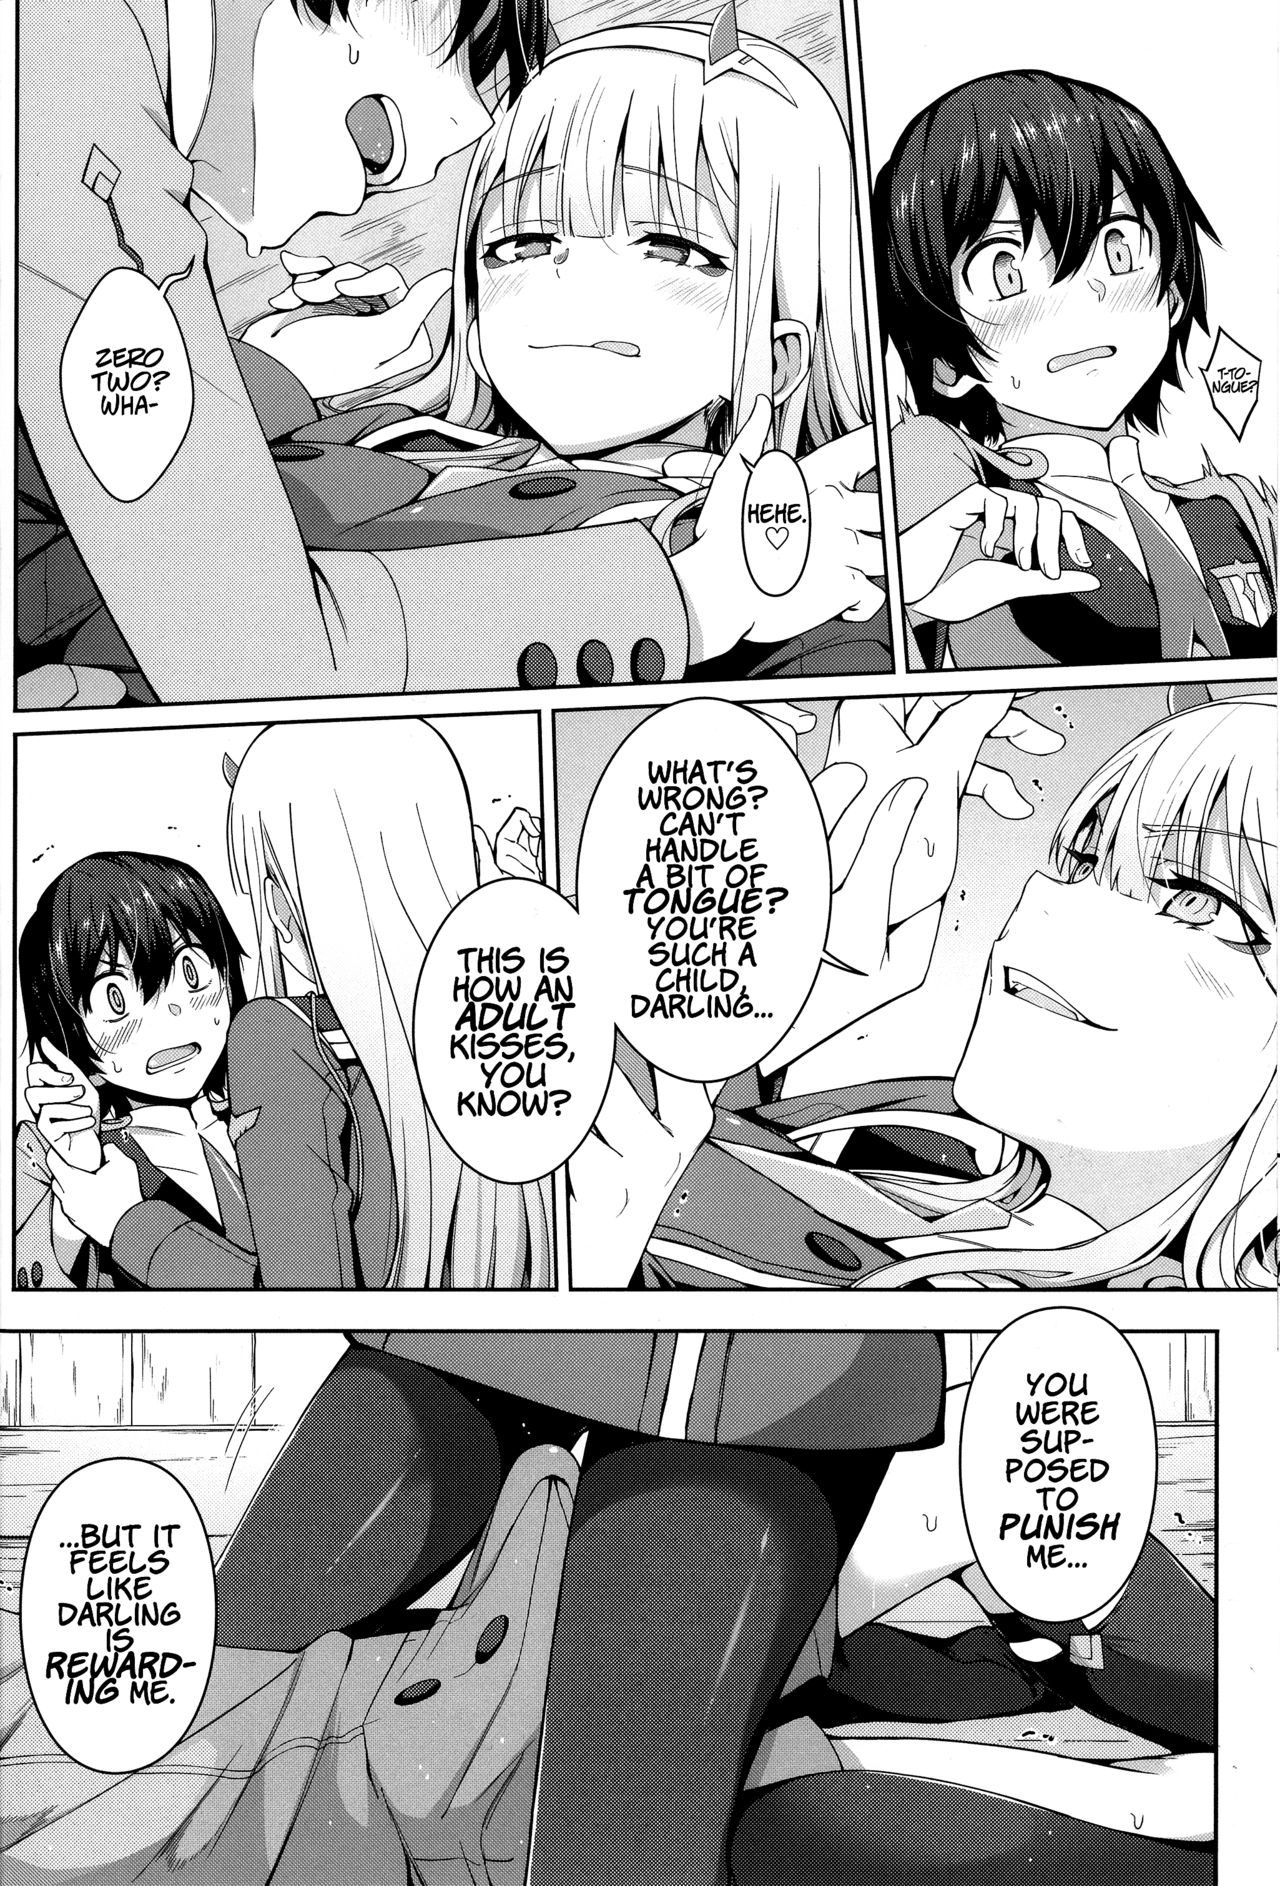 Forbidden Connection (Darling In The FranXX) [Chicke III , 4why] - 1 .  Forbidden Connection - Chapter 1 (Darling In The FranXX) [Chicke III ,  4why] - AllPornComic